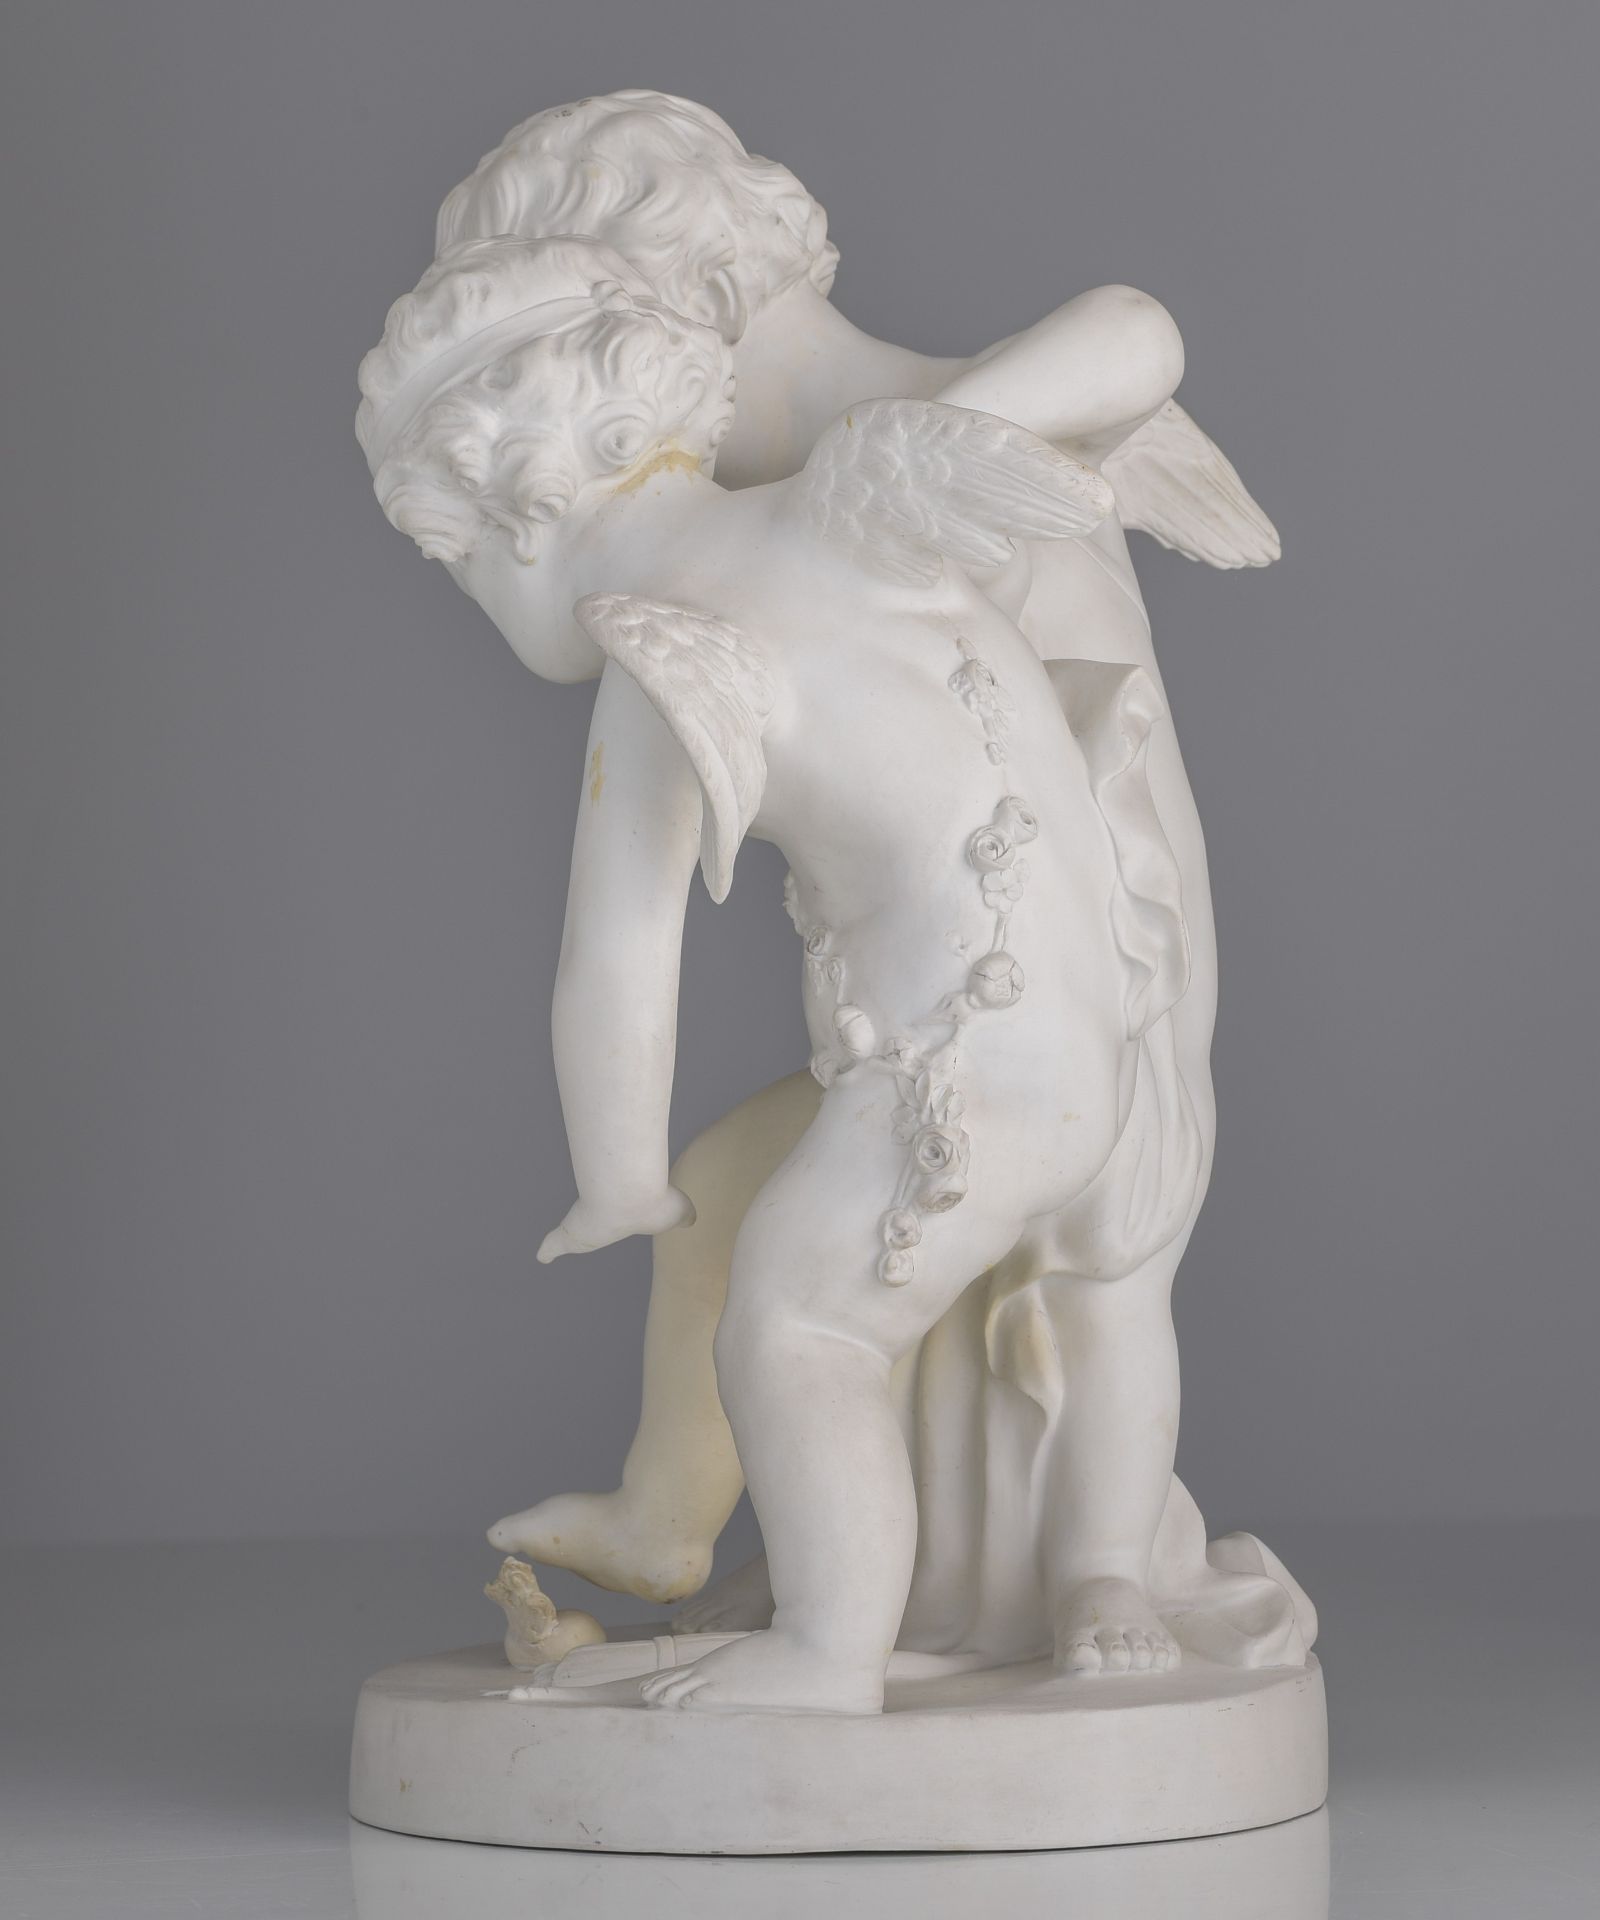 Etienne Maurice Falconet (1716-1791), 'Bataille pour l'amour', biscuit, H 37,5 cm - Image 3 of 14